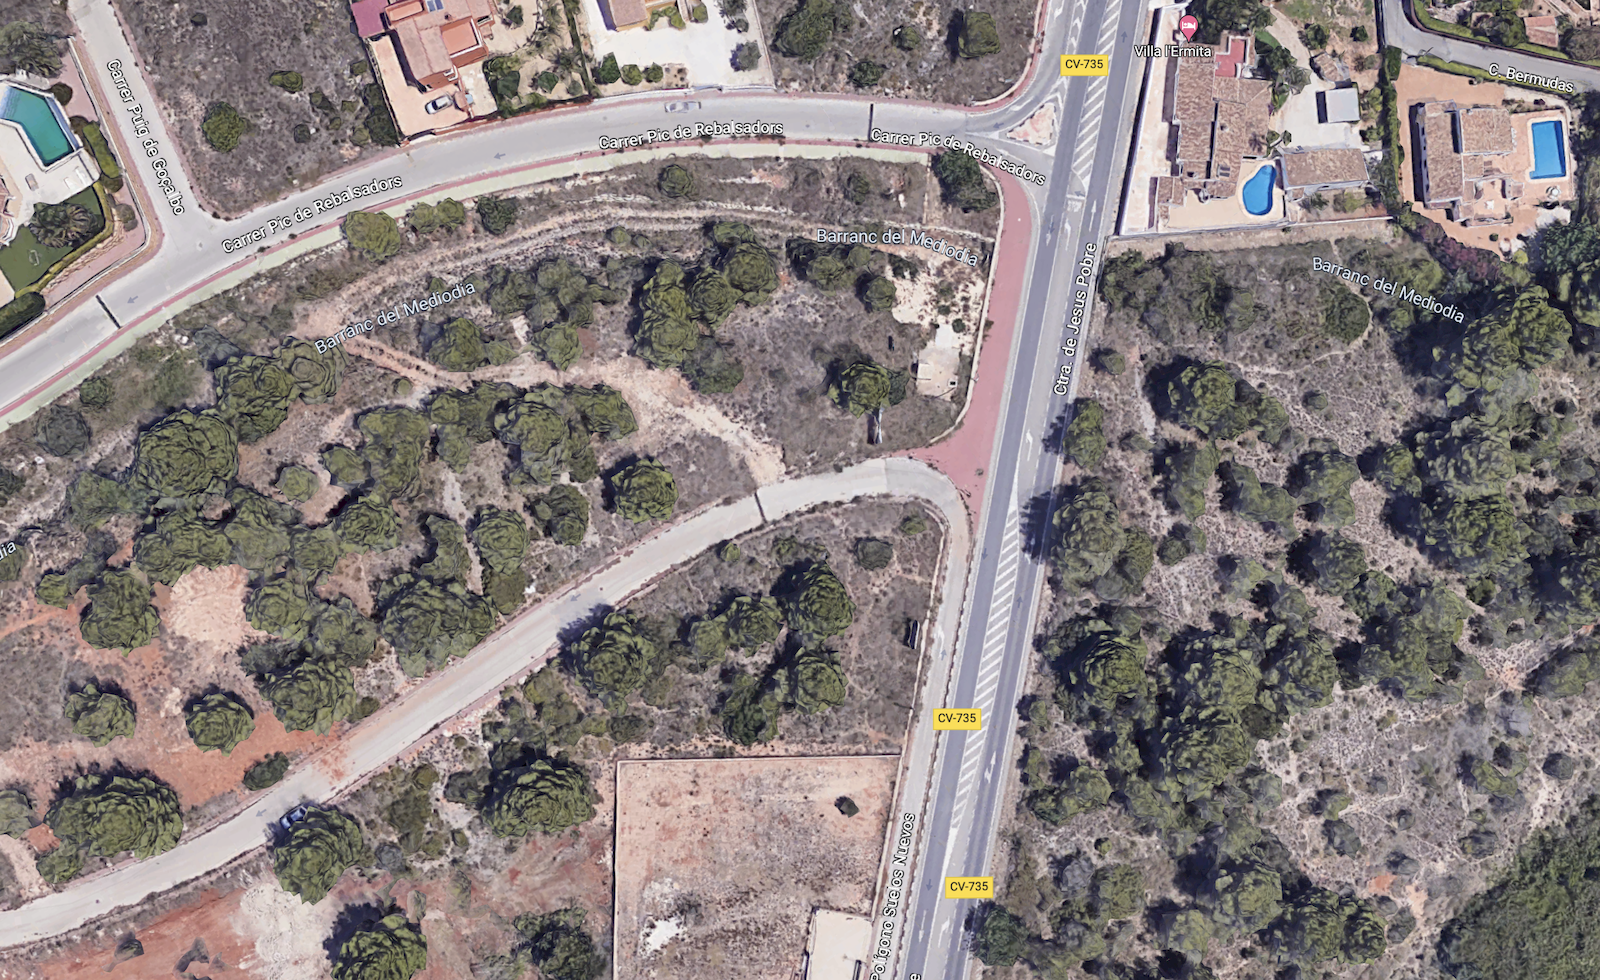 Commercial Plot for sale in Javea.